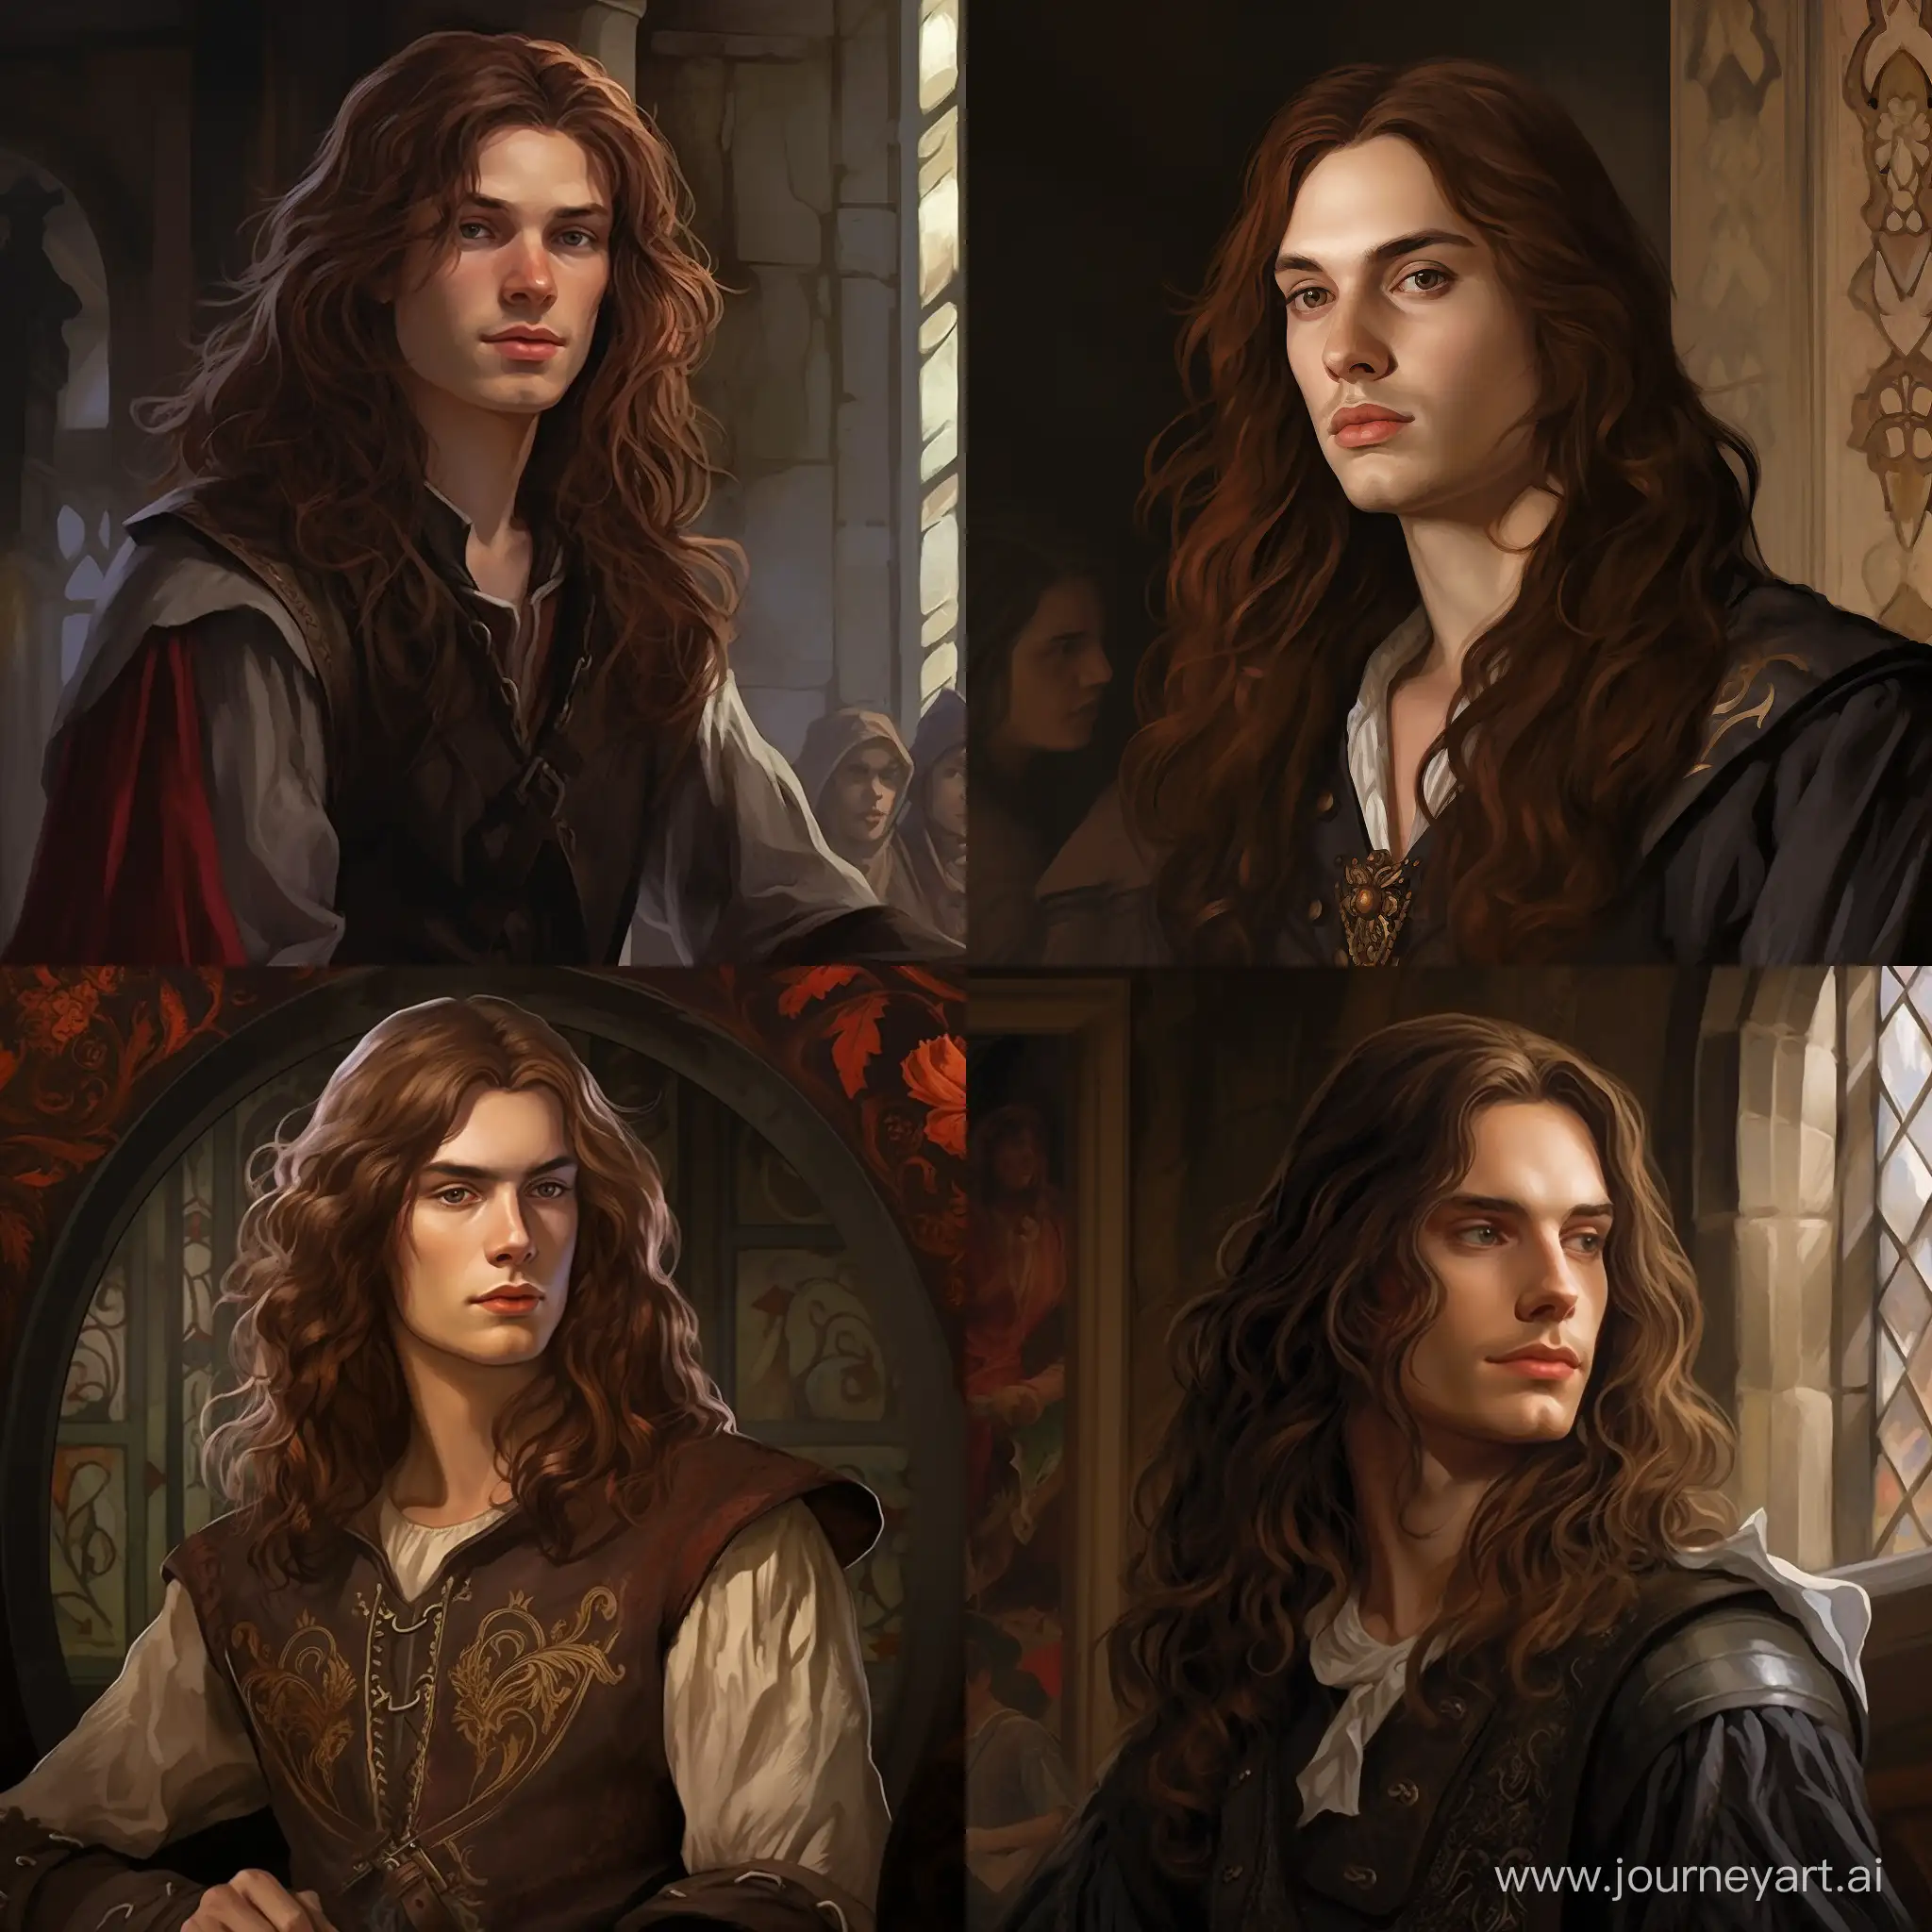 Generate an image of a 22-year-old governor's son with long brown hair, clean-shaven, a face adorned with subtle wrinkles indicating life experiences. Around his neck, there hangs a crystal emitting a gentle glow from within. Capture the essence of his confident demeanor and captivating charm that draws attention in any setting,
medieval city, fantasy,realistic,digital art, 4k, fantasy